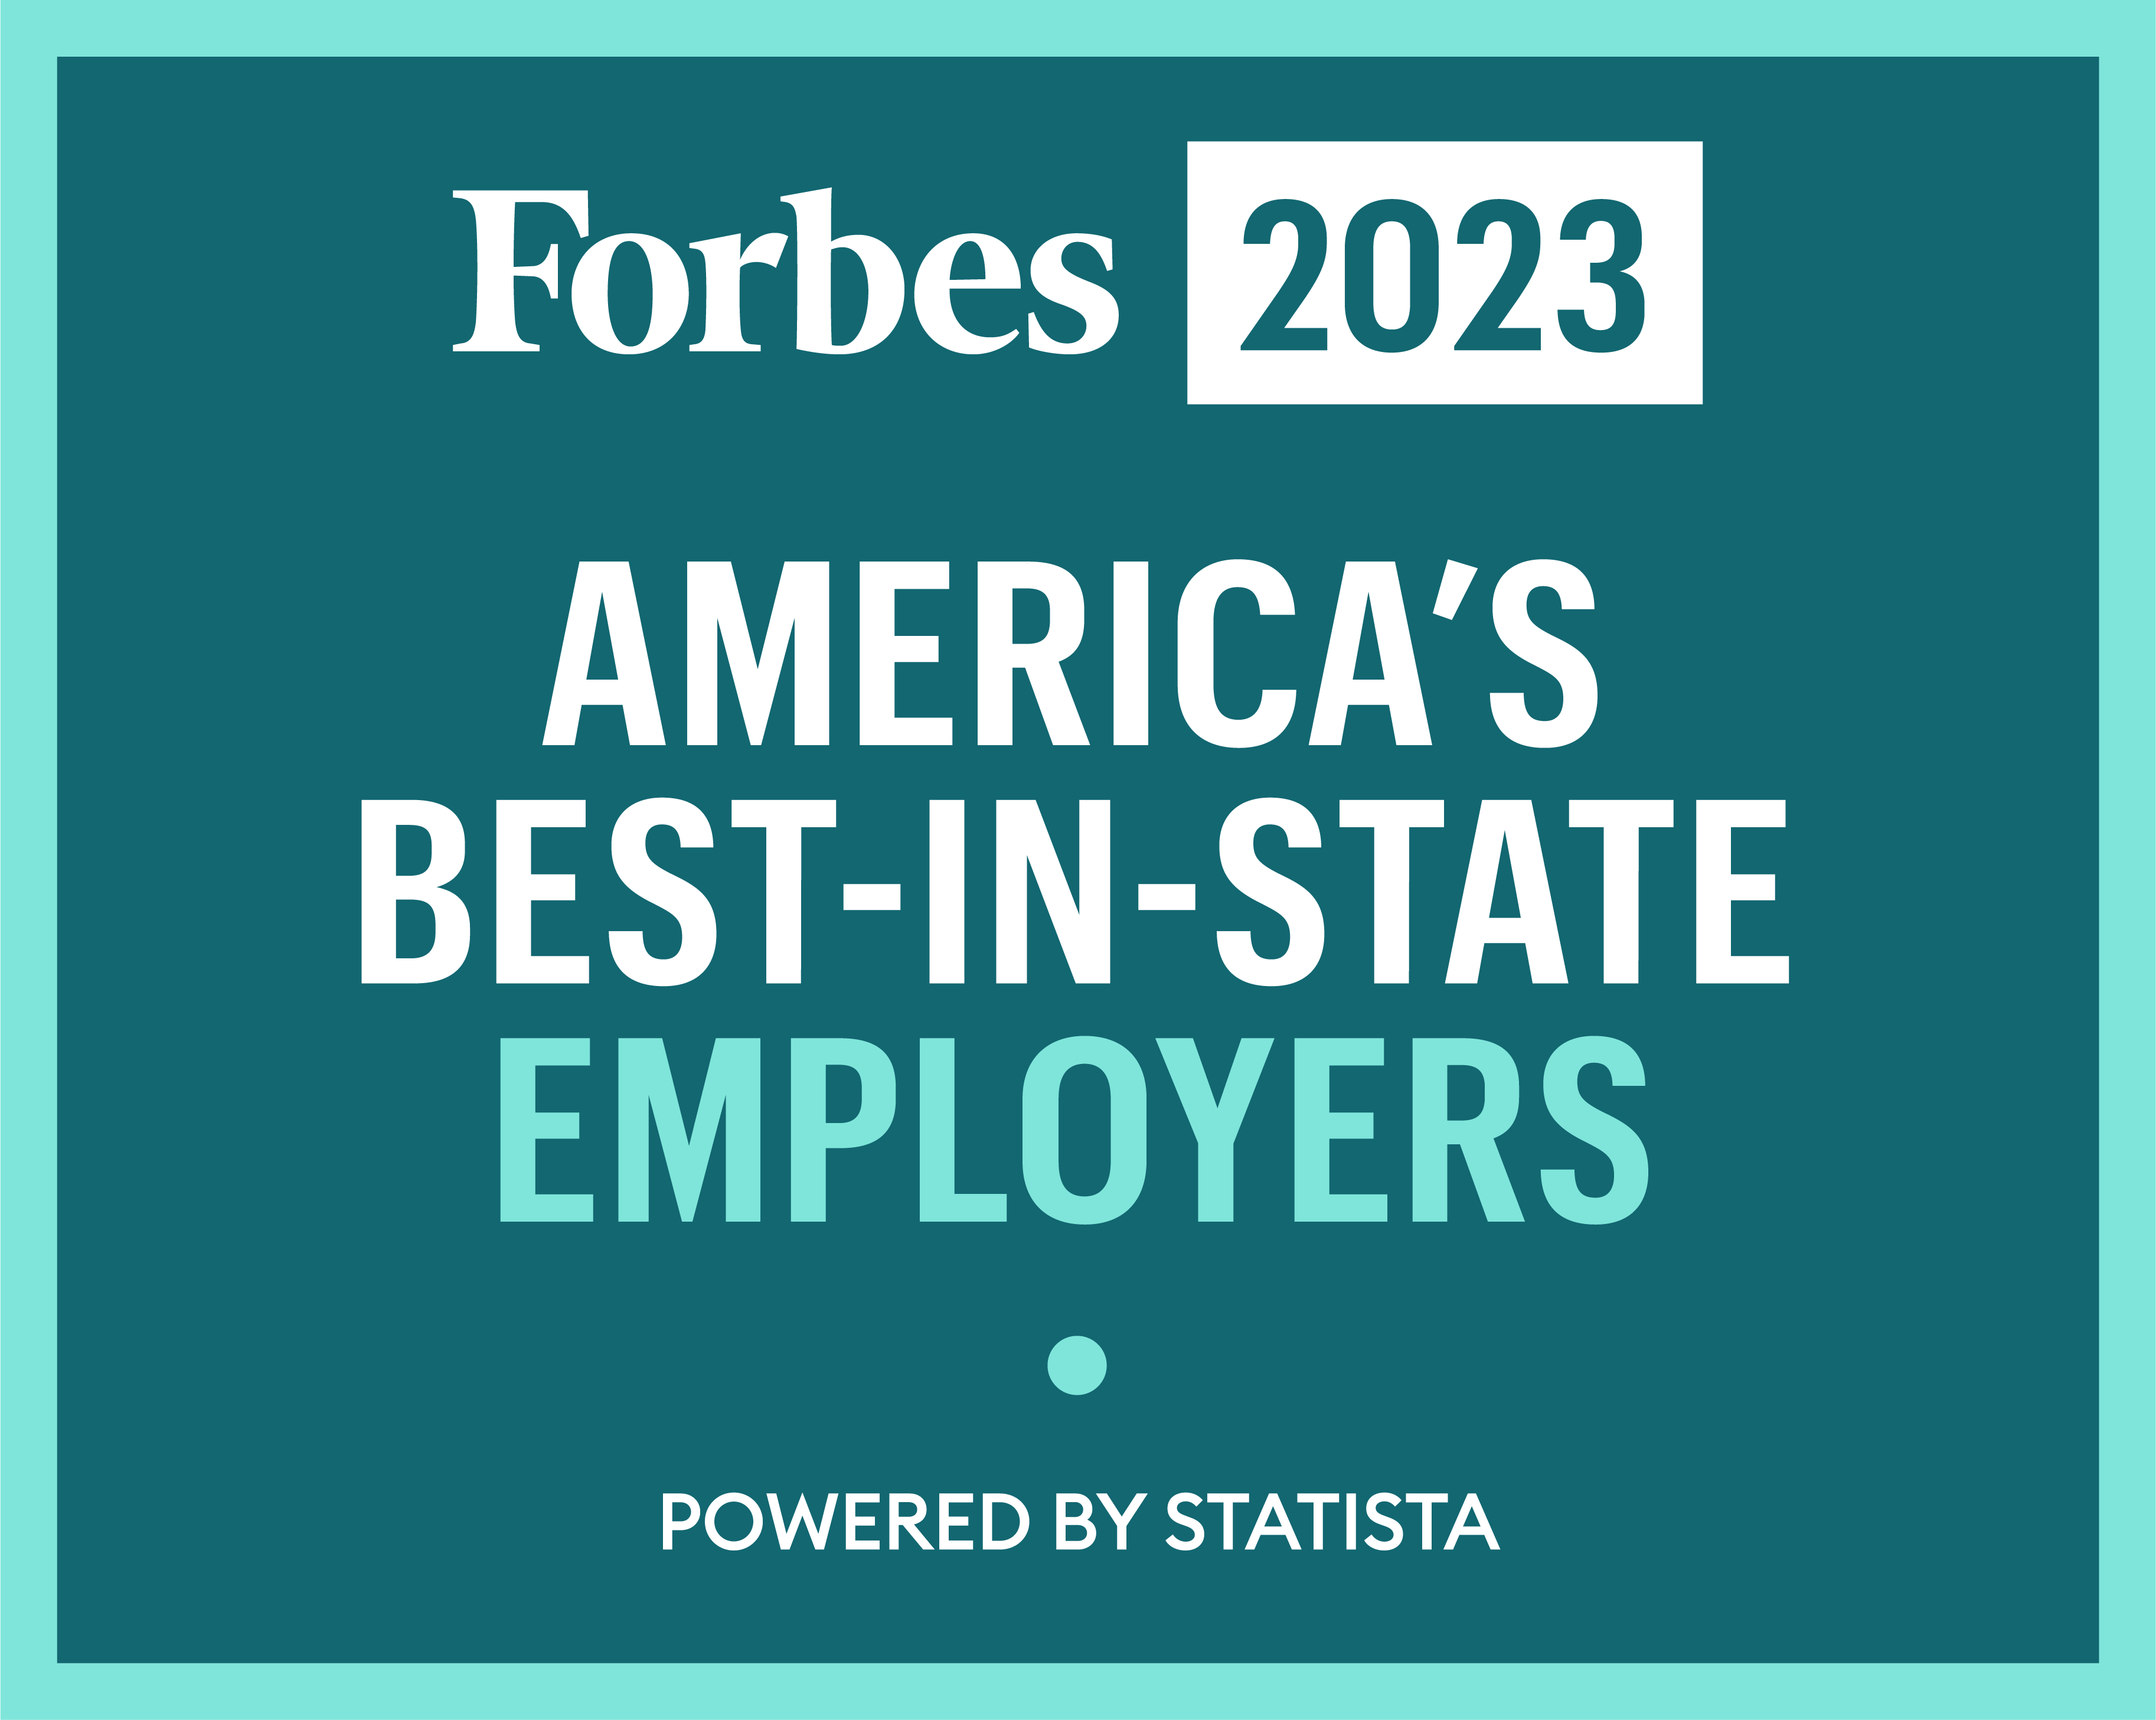 Voted one of Americas best-in-state employers in 2023 by Forbes